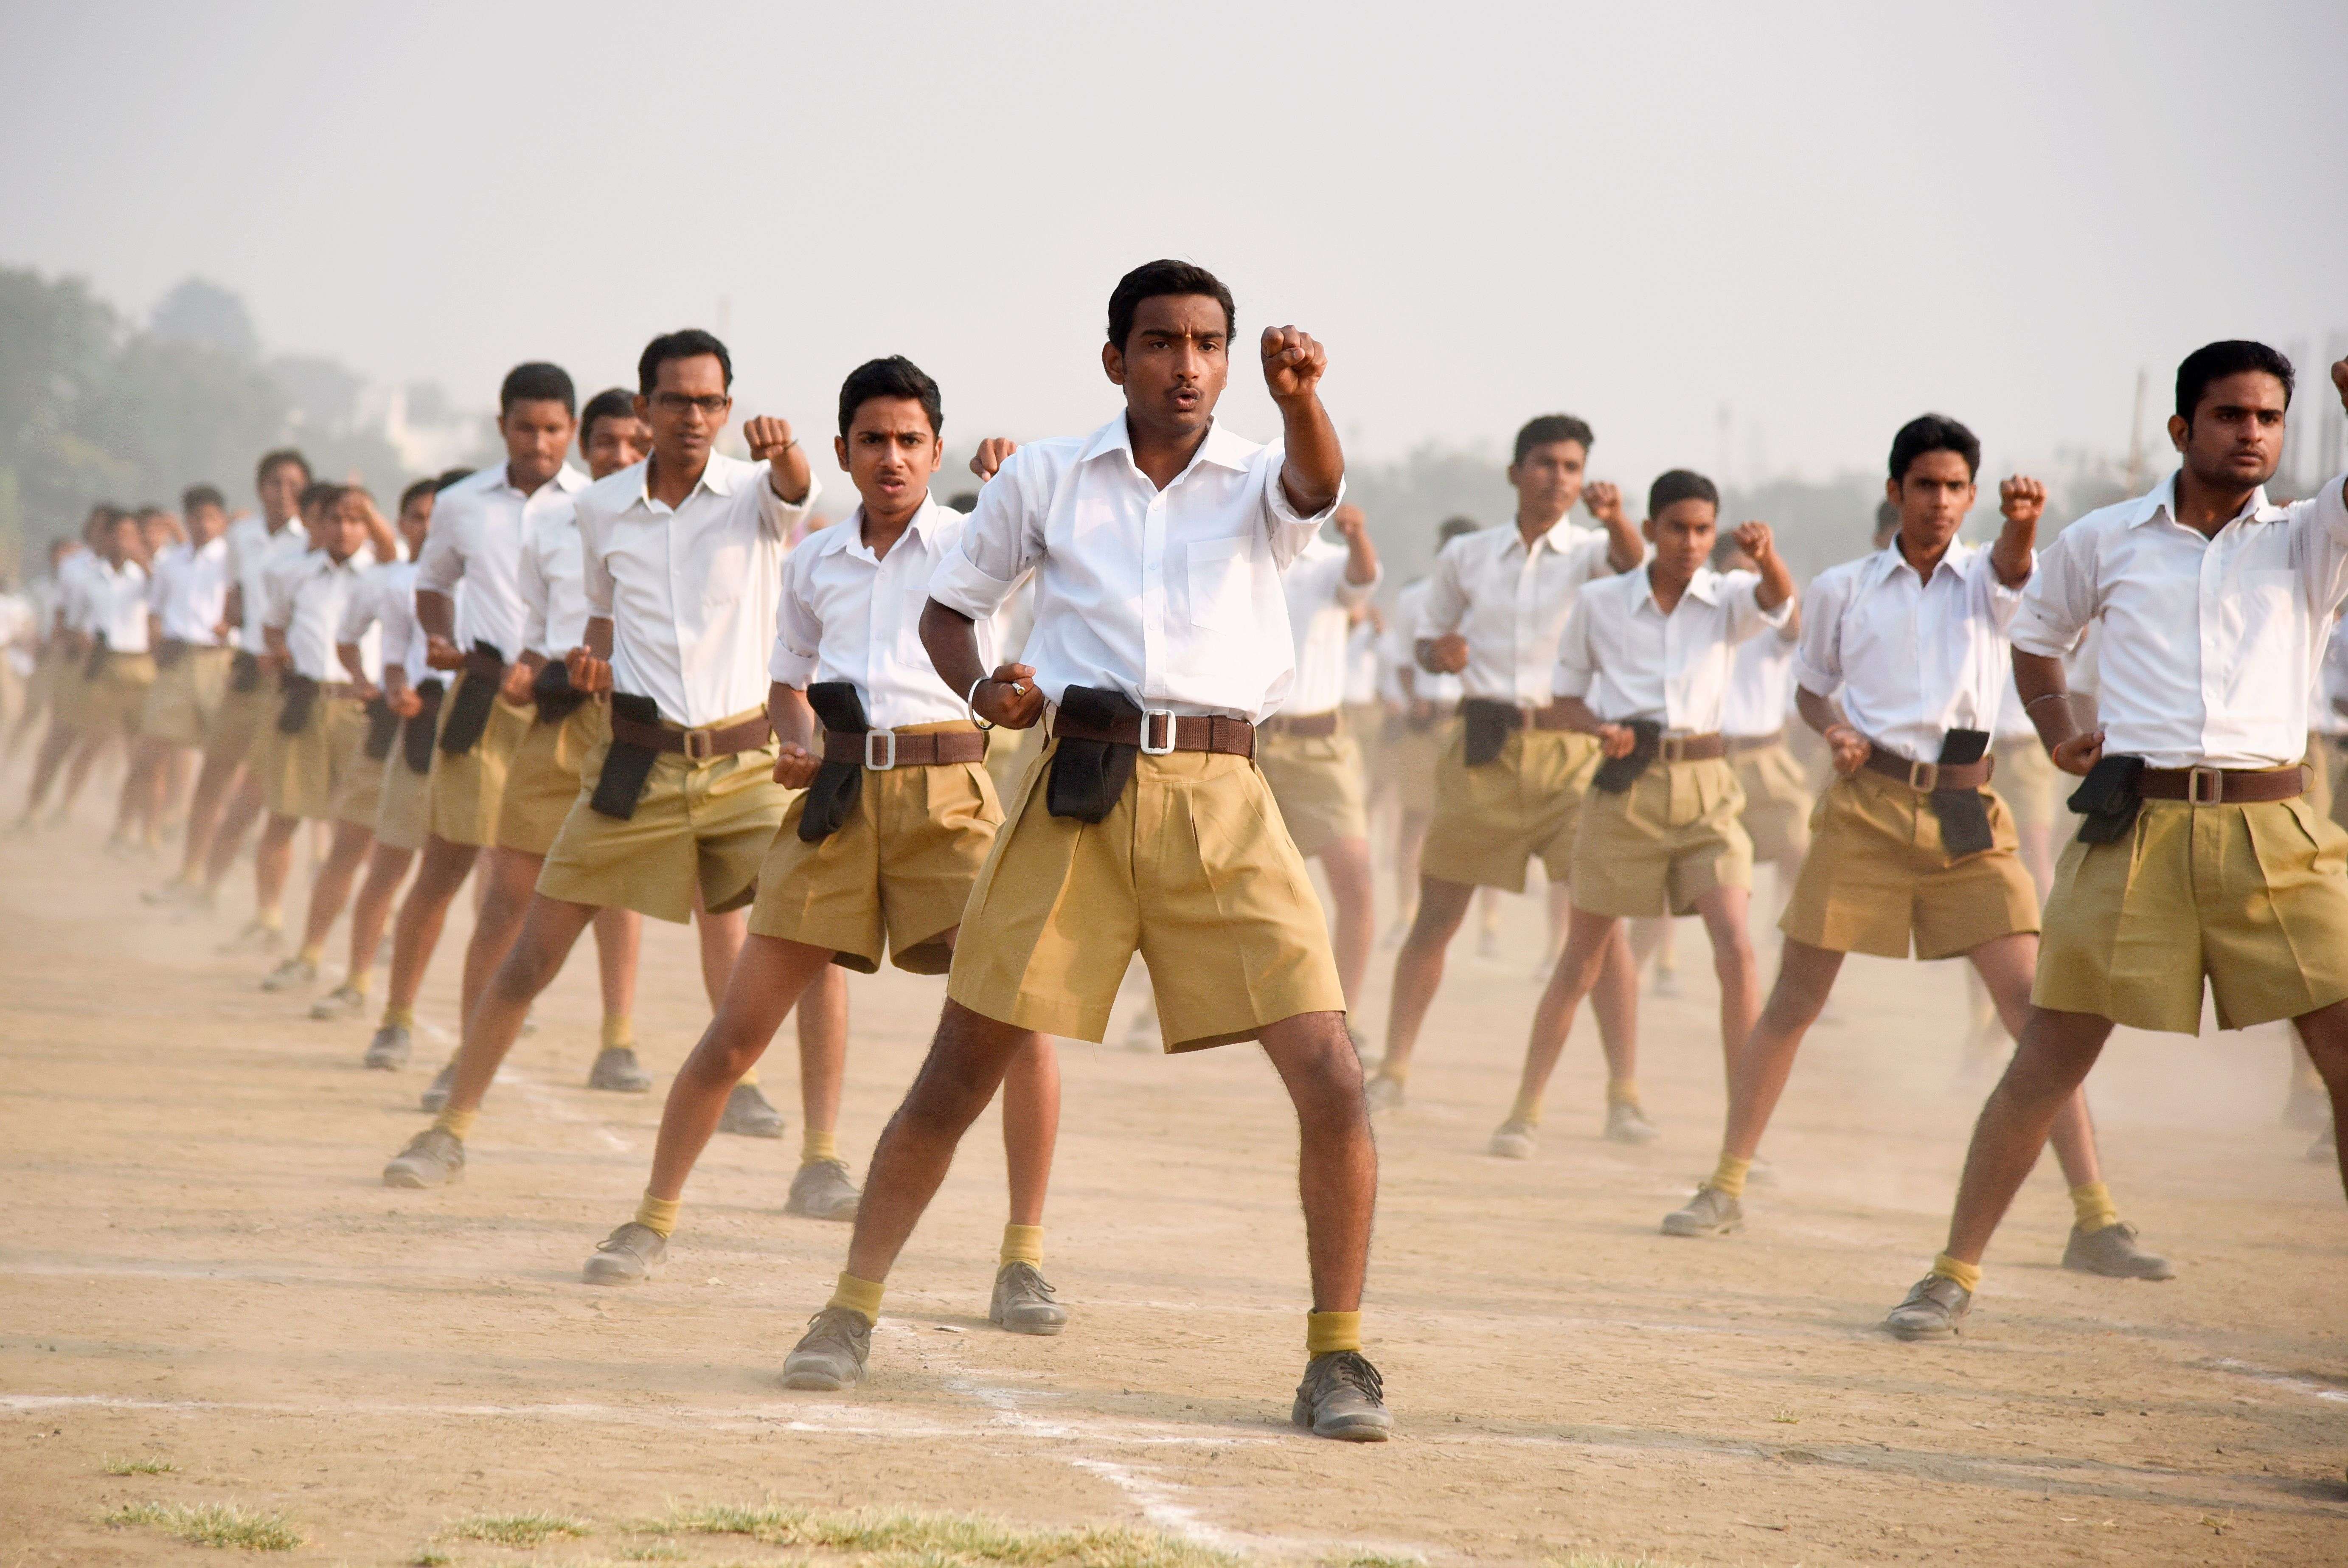 New RSS uniform had its own perks! : r/indianews